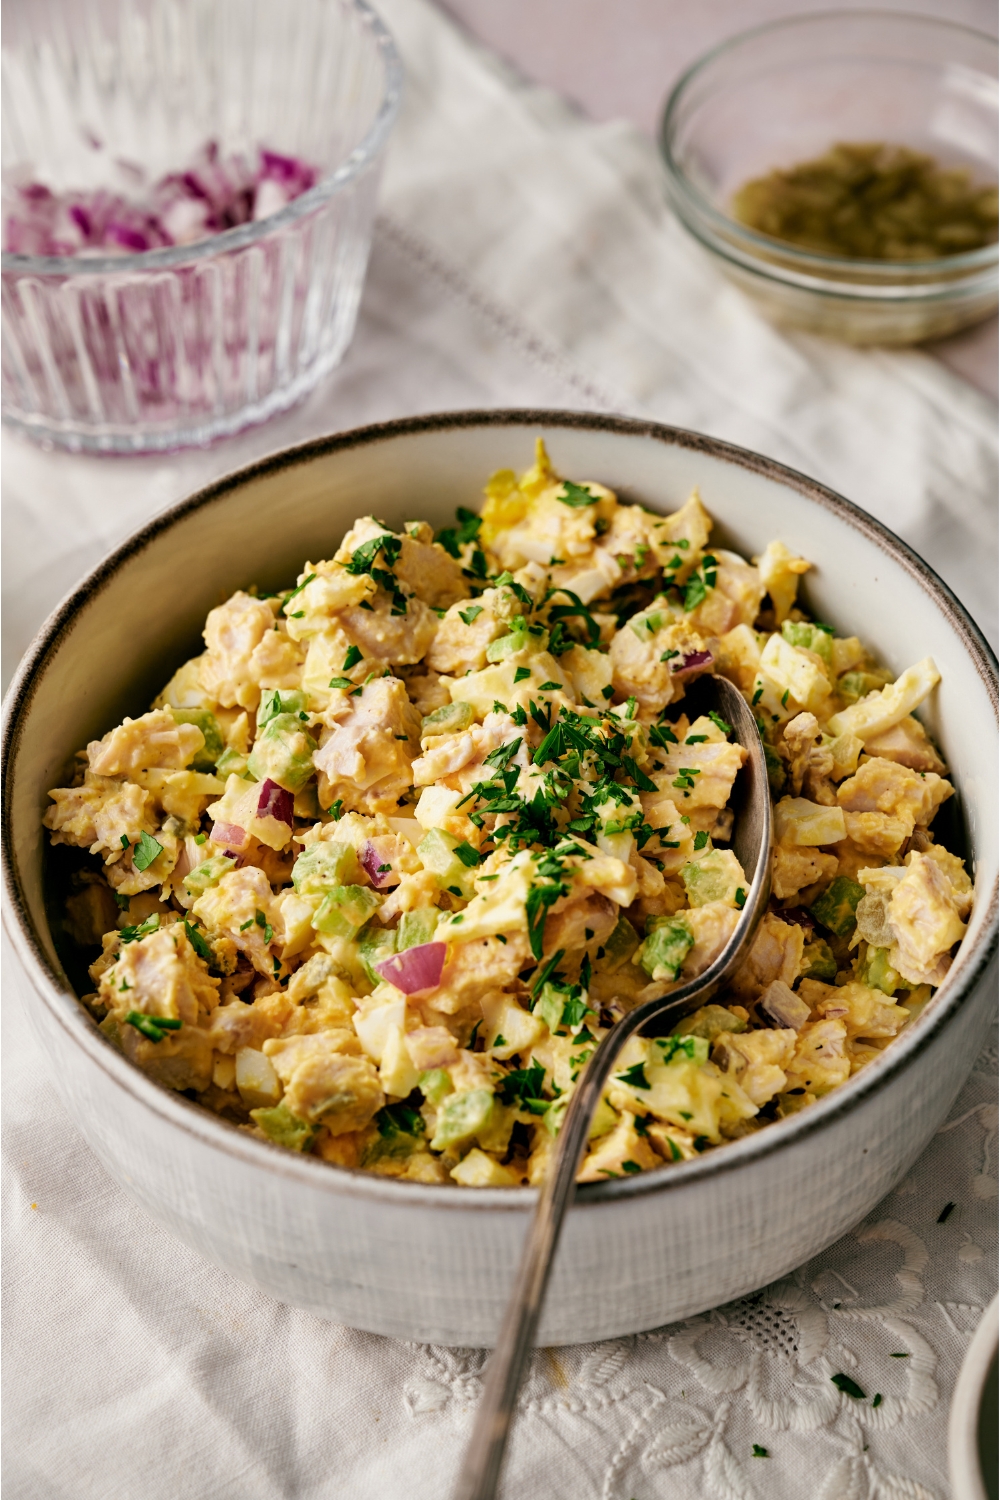 A bowl of chicken and egg salad with pieces of chopped celery, red onion, and fresh green herbs. There is a spoon in the bowl.